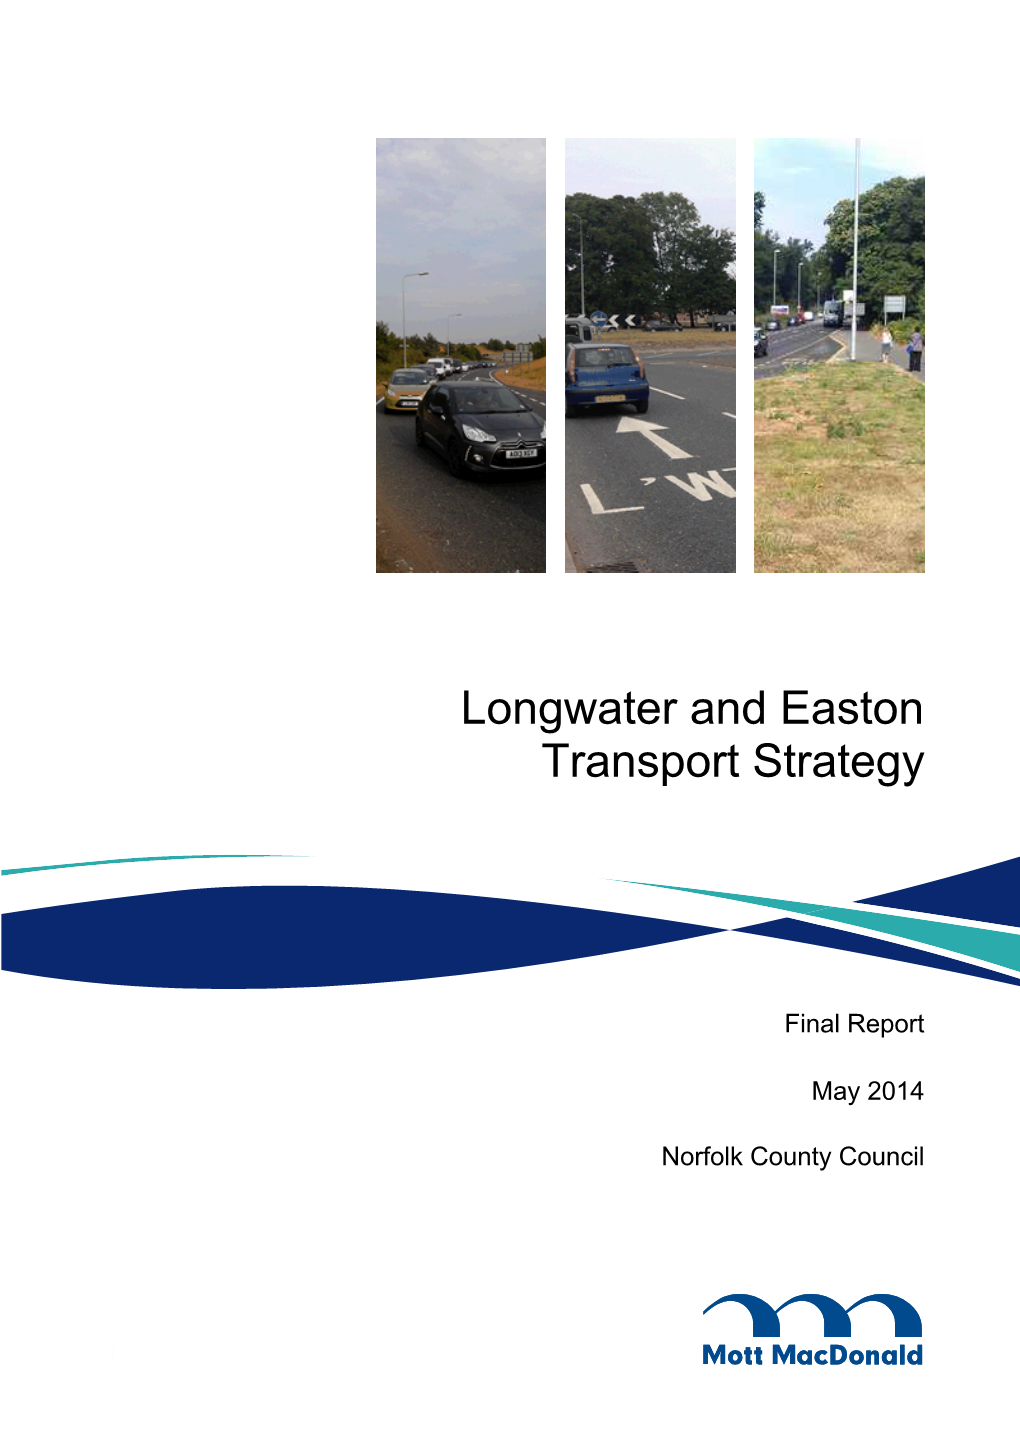 Longwater and Easton Transport Strategy